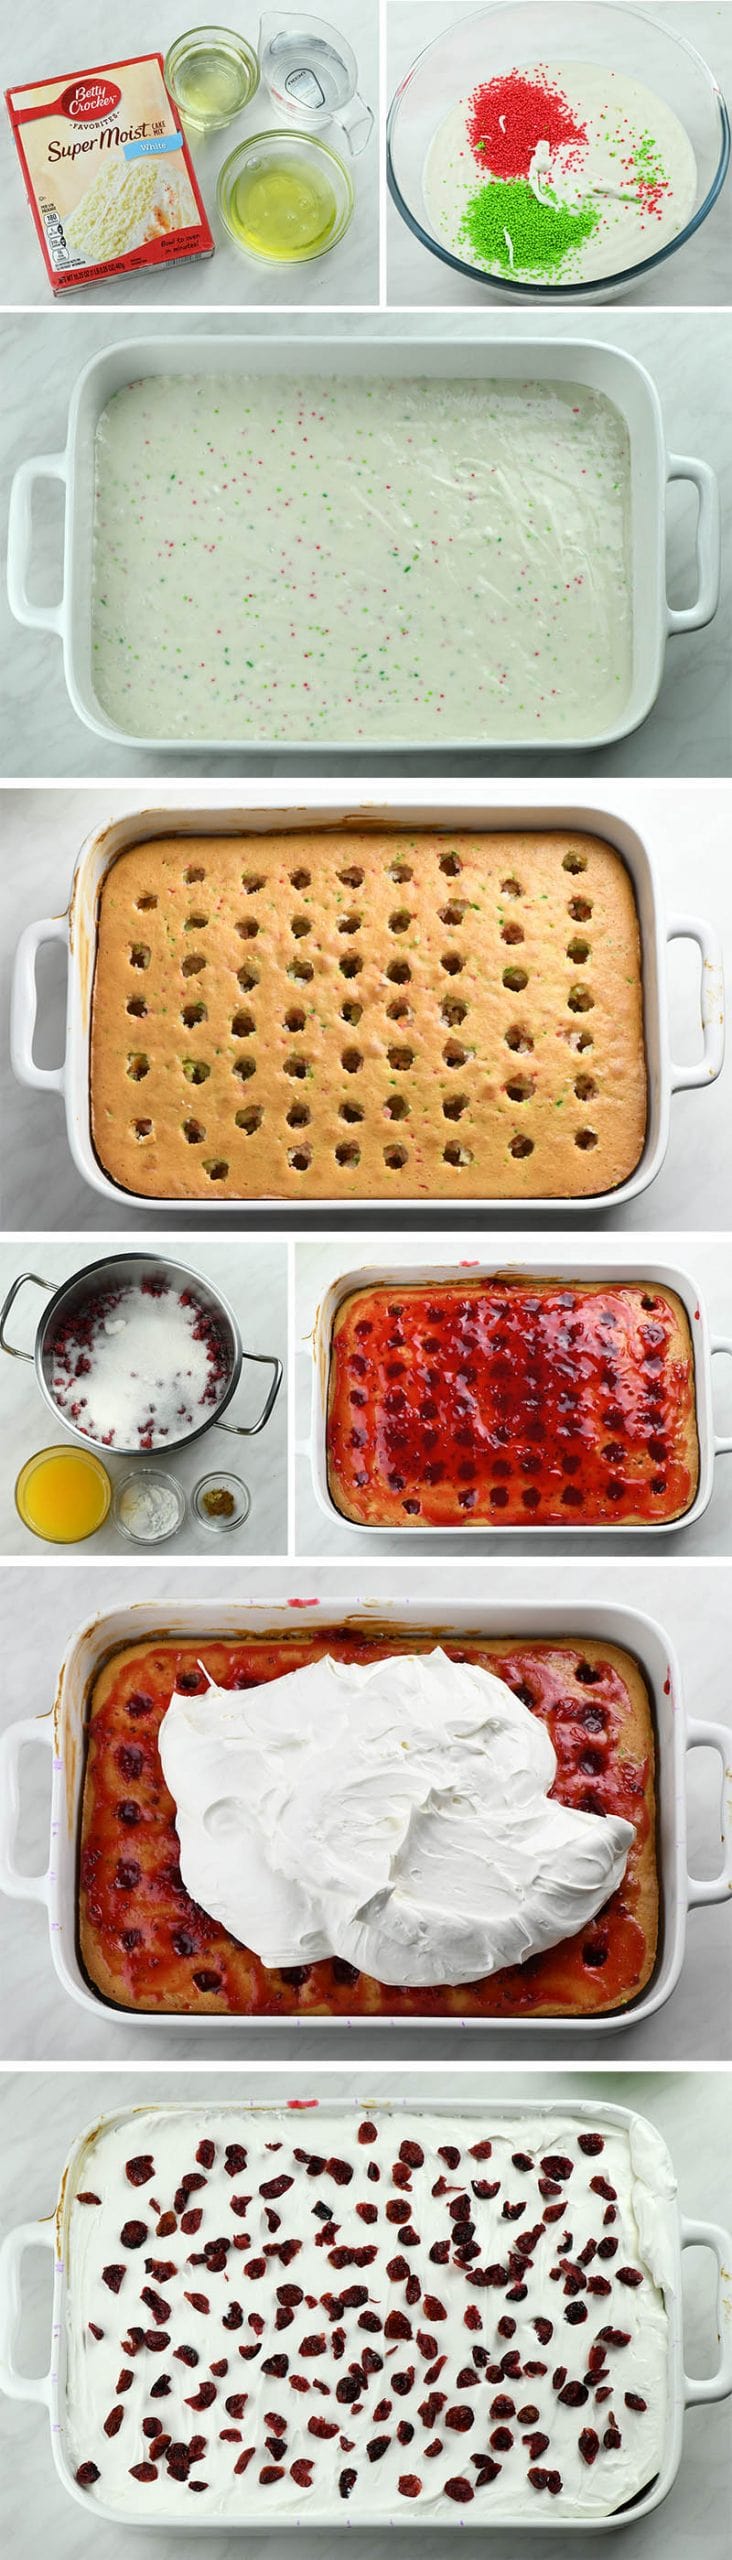 Couple of images for step-by-step Cranberry Poke Cake preparation.